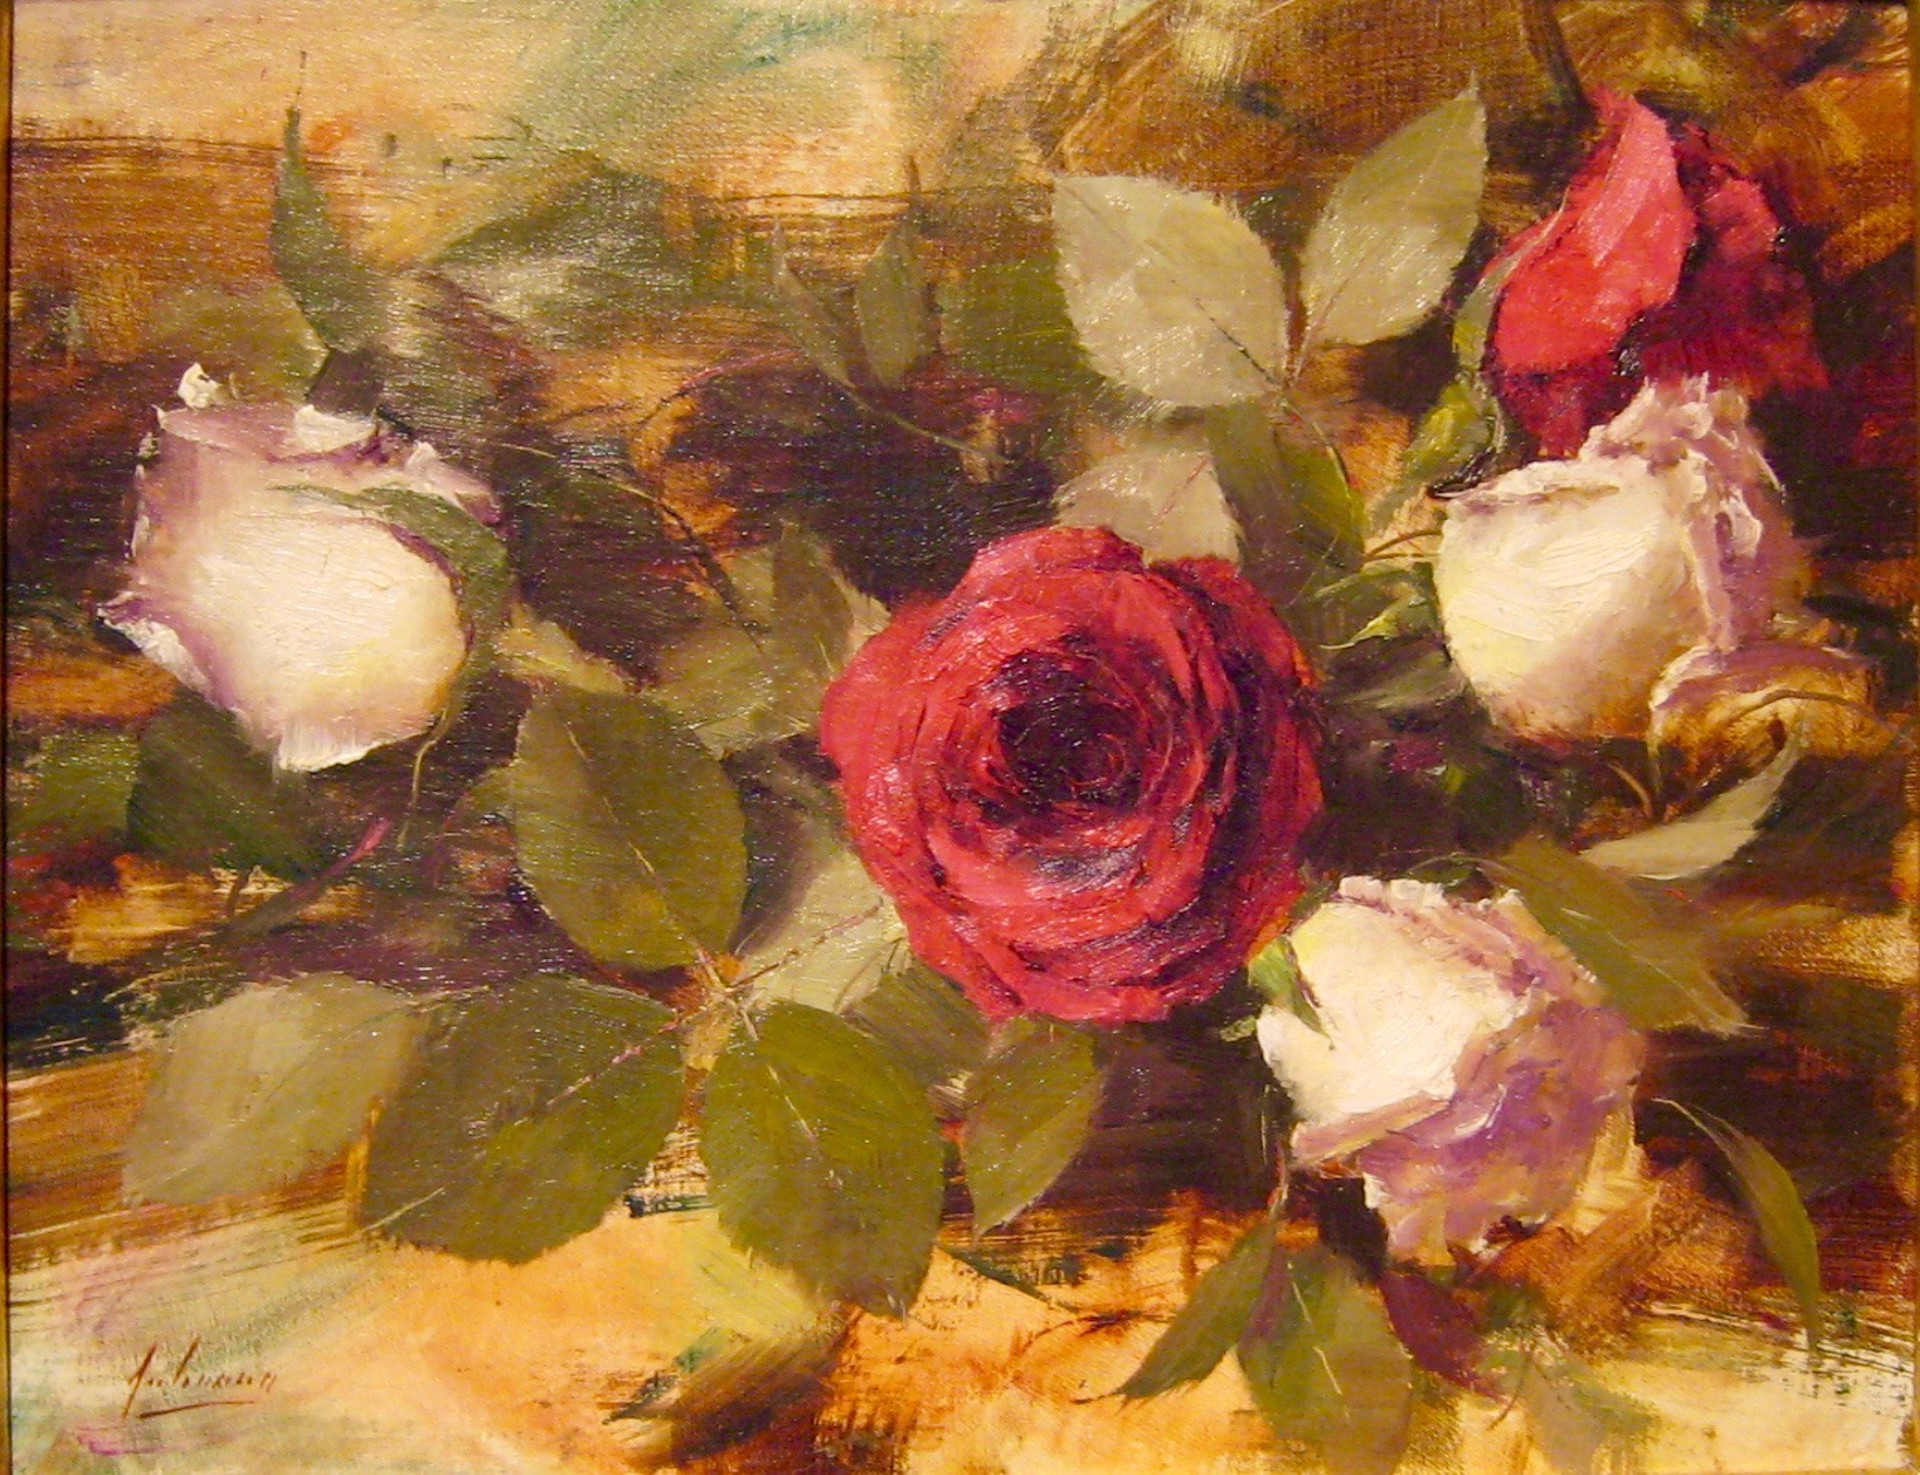 Roses in Amish Pitcher by Robert Johnson